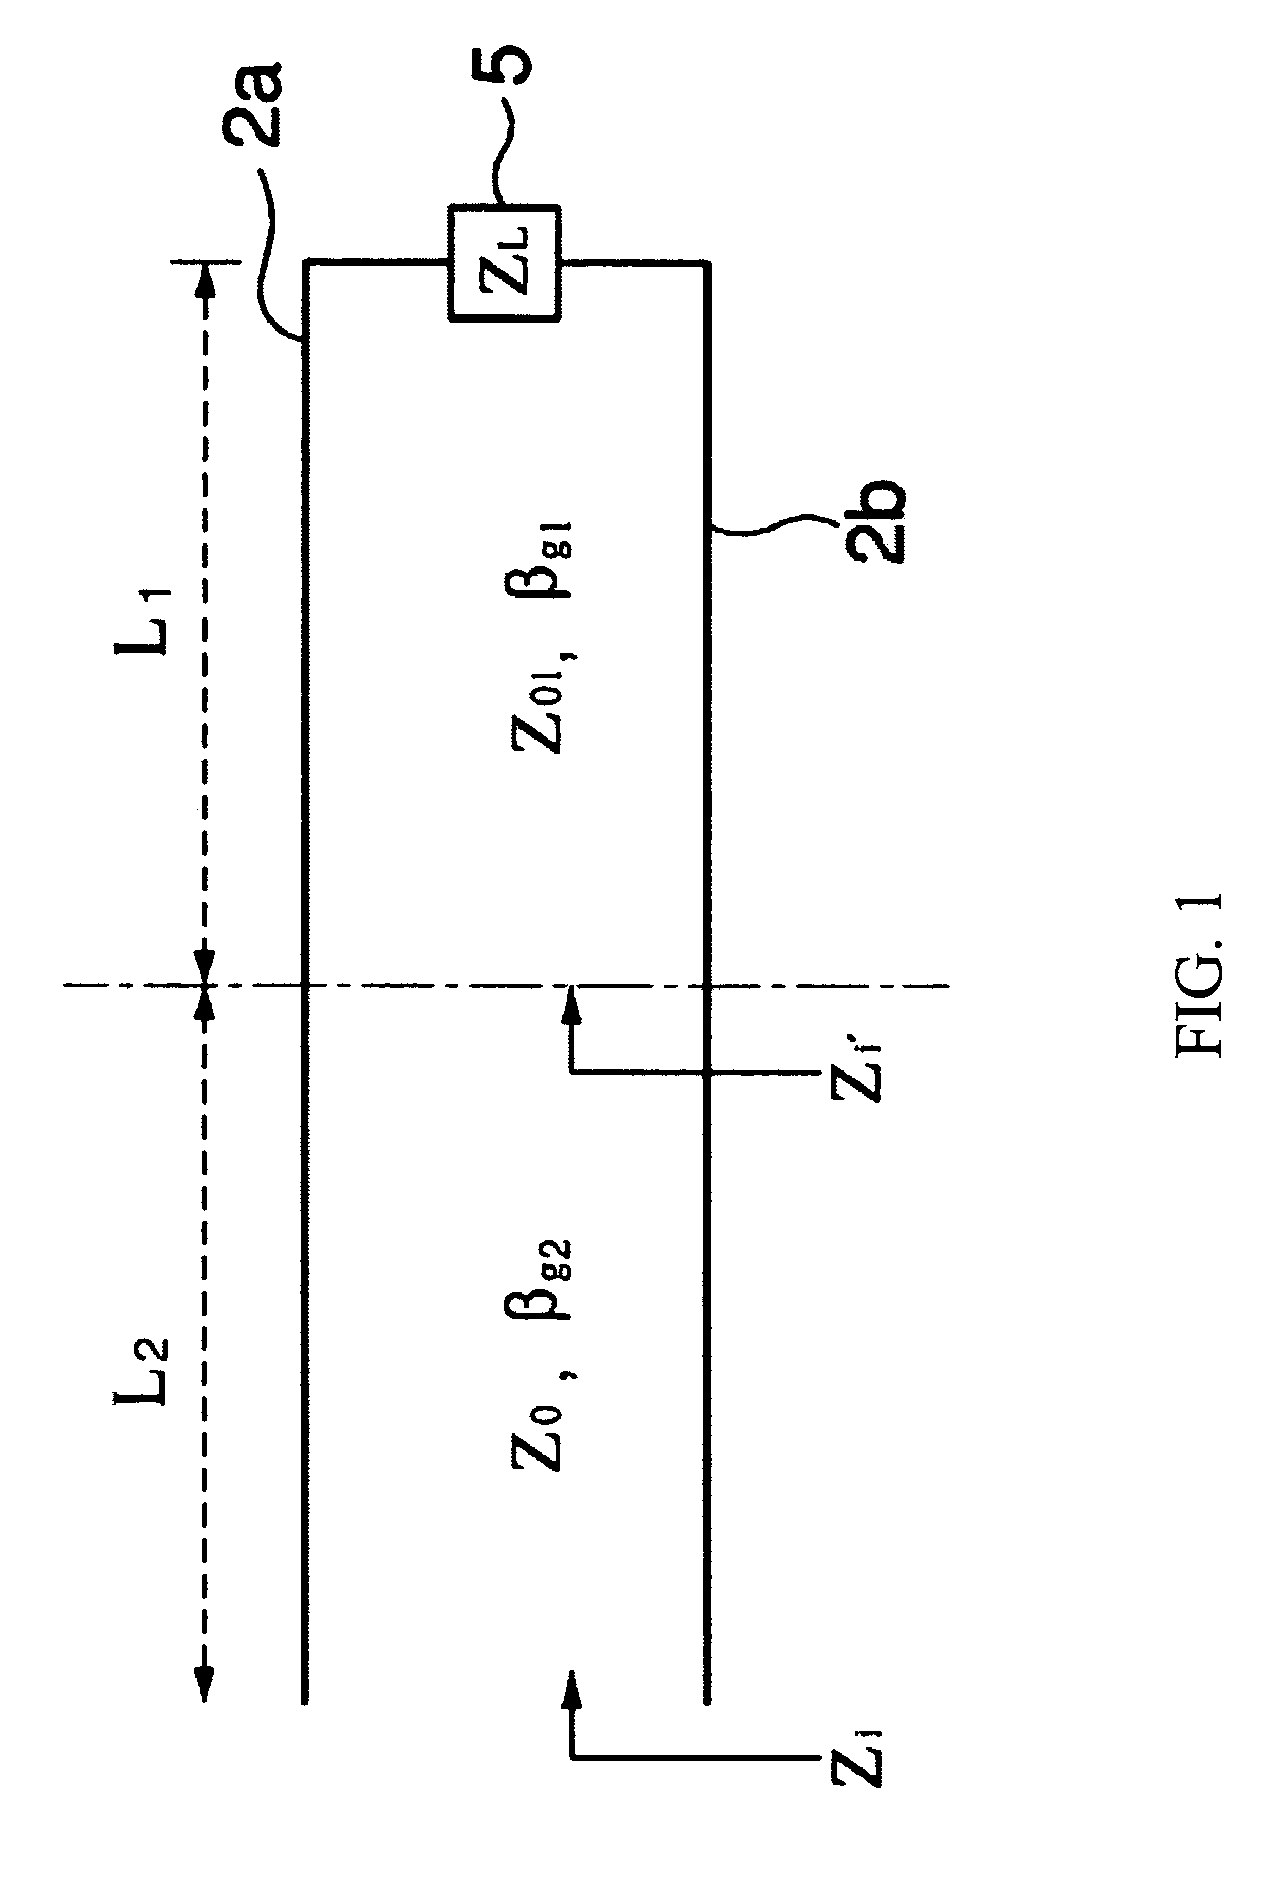 Apparatus and method for measuring the amount of fuel in a vehicle using transmission lines